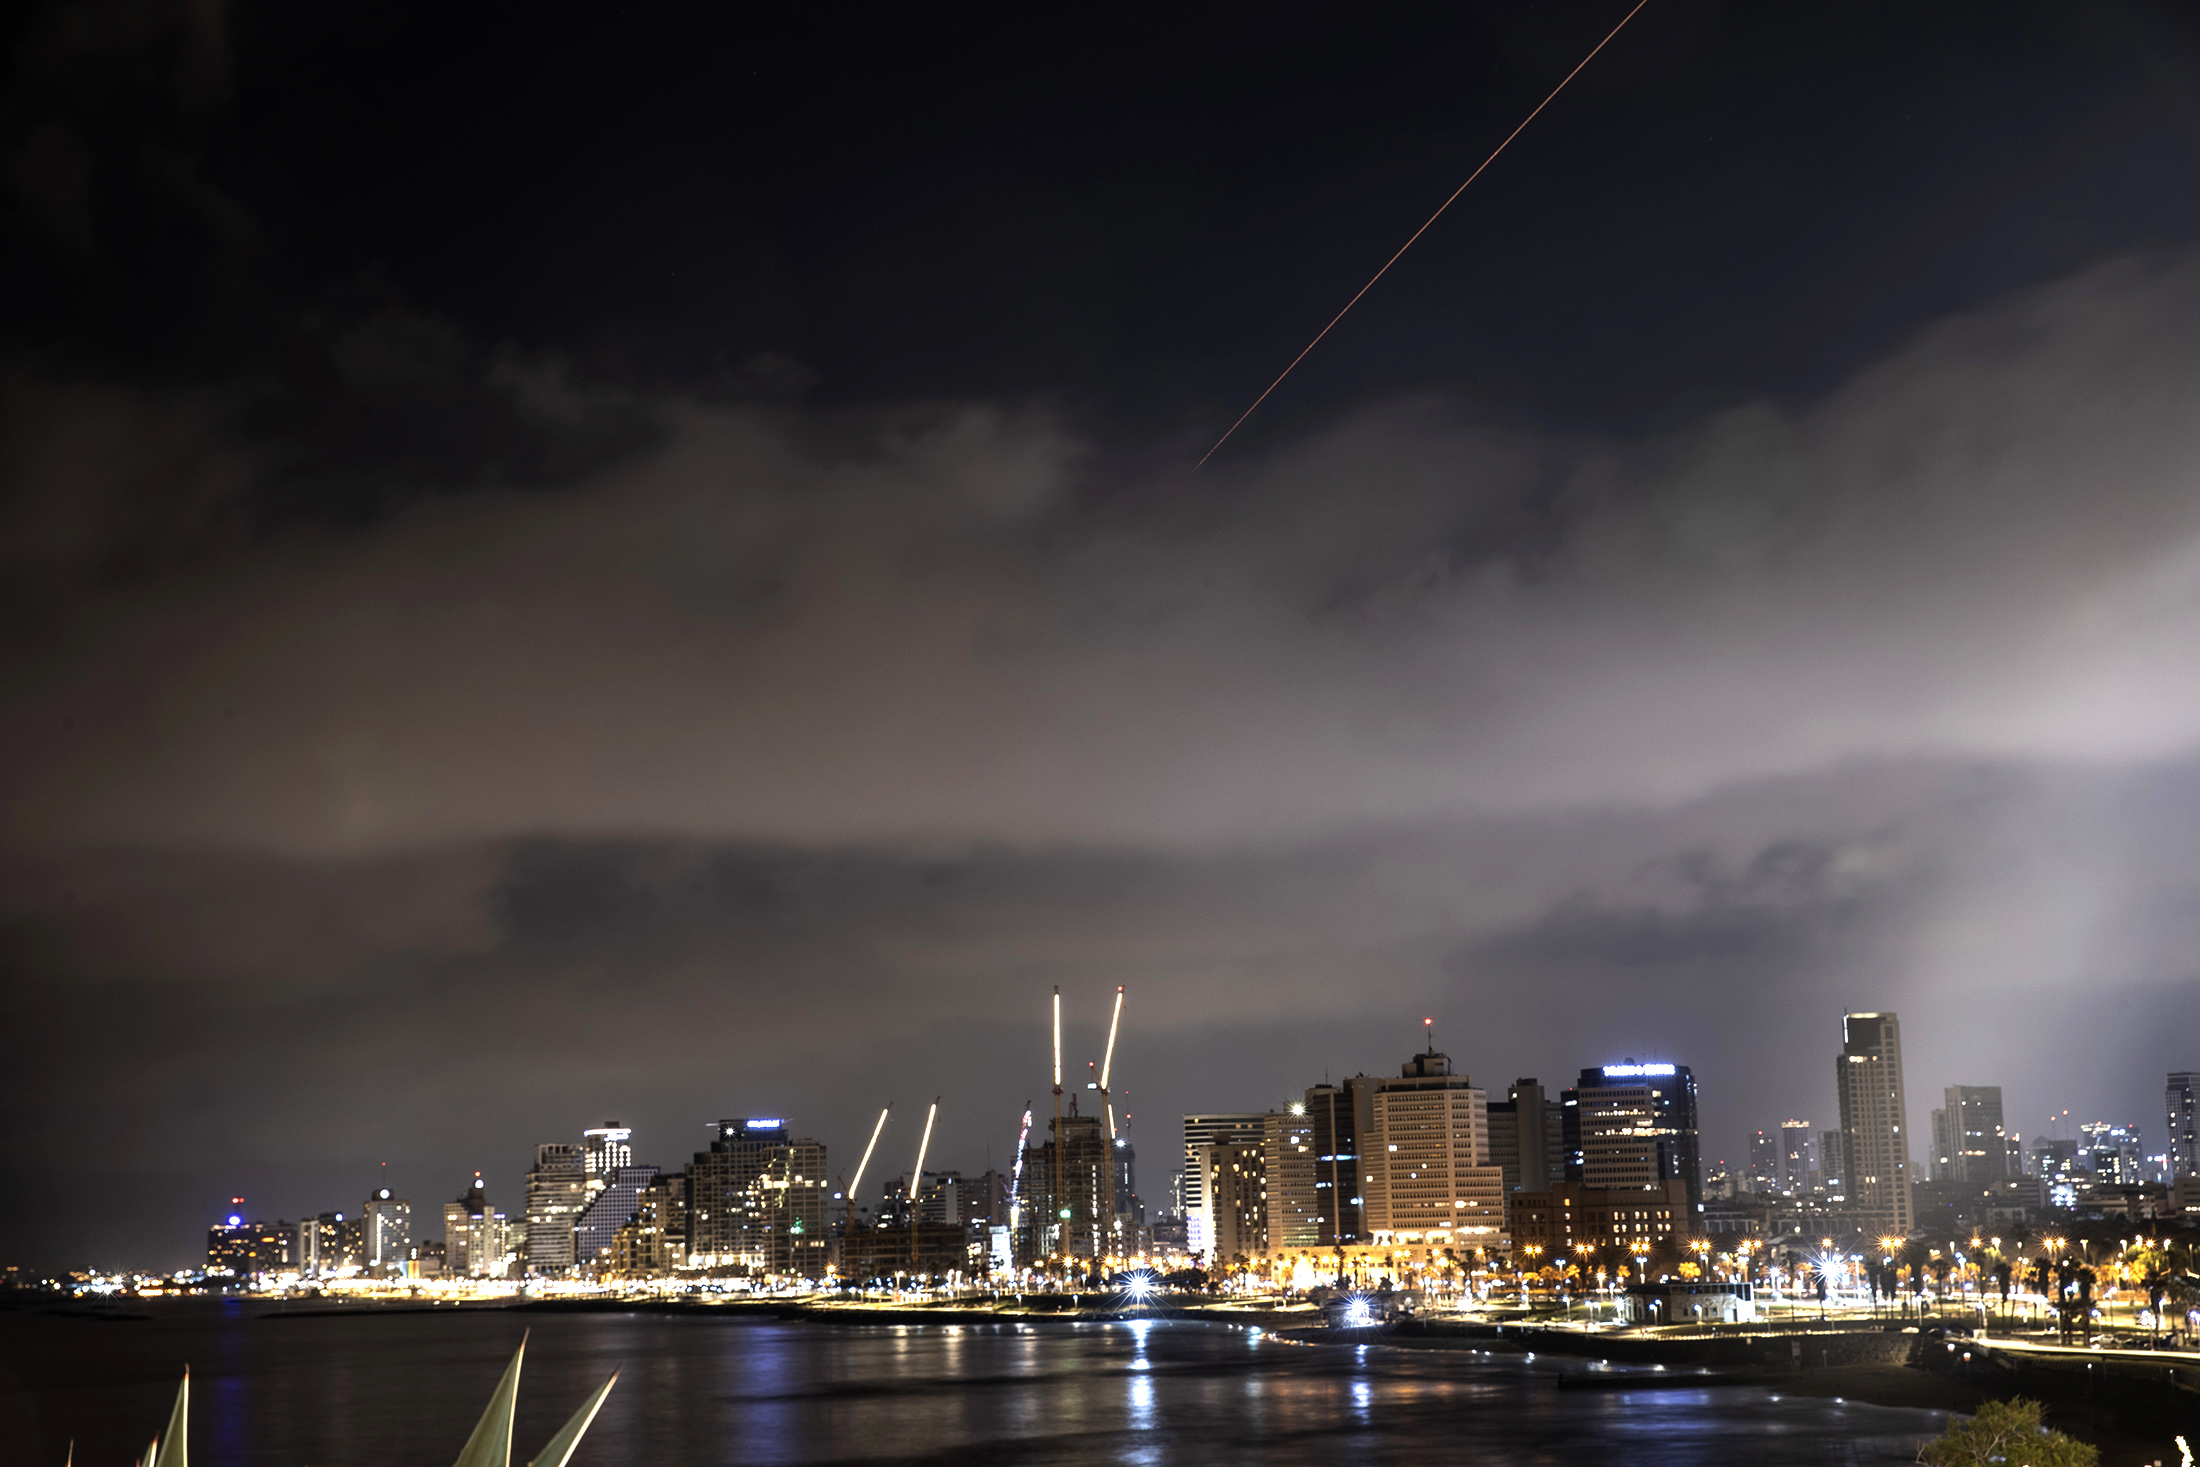 Explosions over the skies of the capital, following the attack from Iran in Tel Aviv, Israel on April 14.